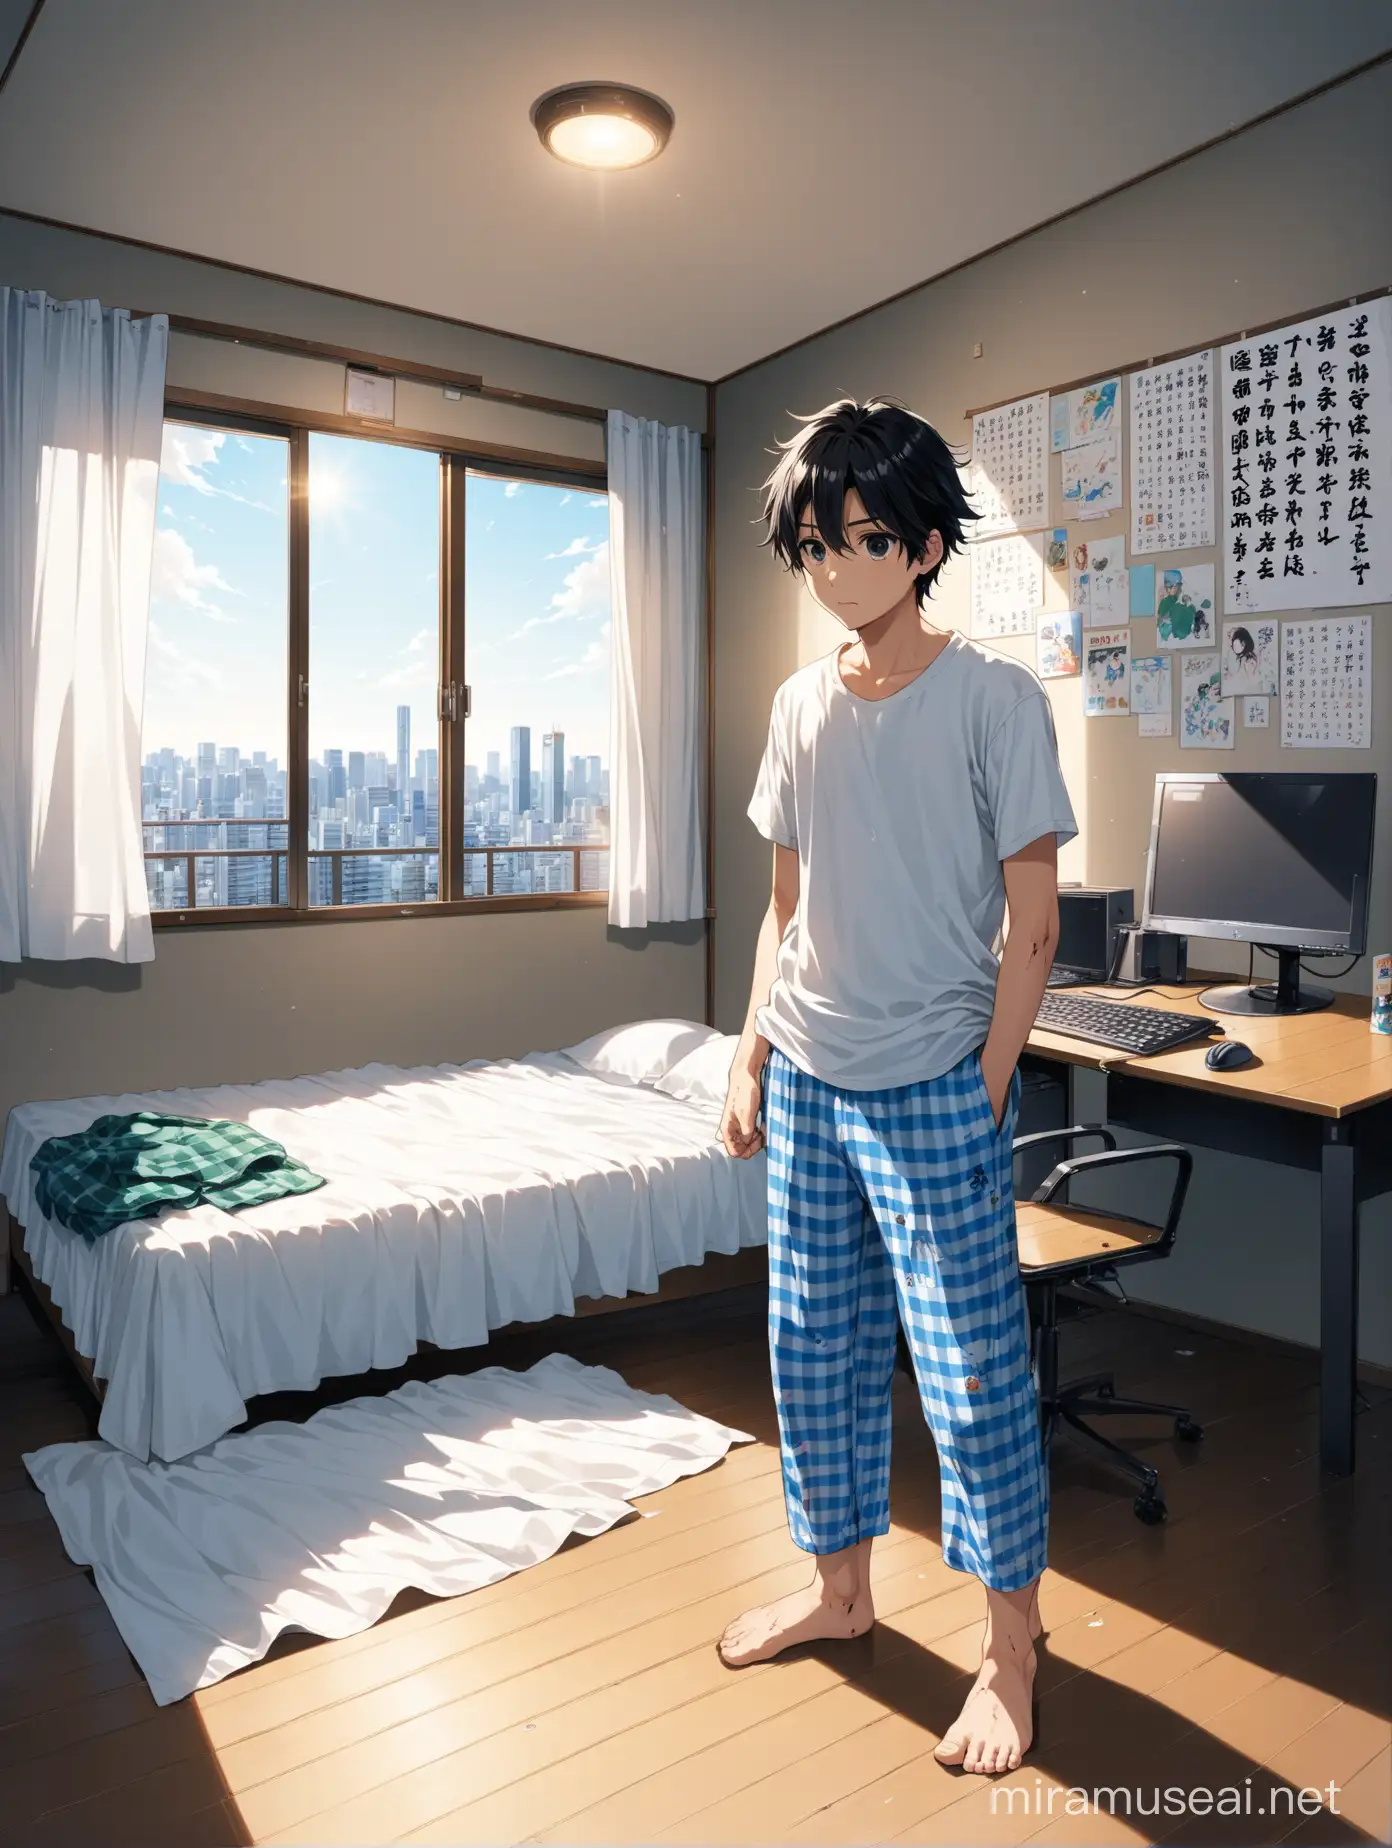 A handsome teenager with fluffy black hair and big black eyes, he scratches his hair questioningly, wearing a white T-shirt with Japanese writing and drawings on it, wearing blue checkered pajama pants, and he is barefoot.  The teenager is standing in the middle of his bedroom. Next to him is a white bed with an untidy white sheet on it, dirty clothes scattered on the floor of the room, and a basketball landed on the ground. In the background, a desk with a computer and a black chair appears. In the background, the open balcony appears, which brings sunlight into the room and appears. Through it the buildings of Tokyo in Japan. There are also pictures of a basketball player hanging on the wall.